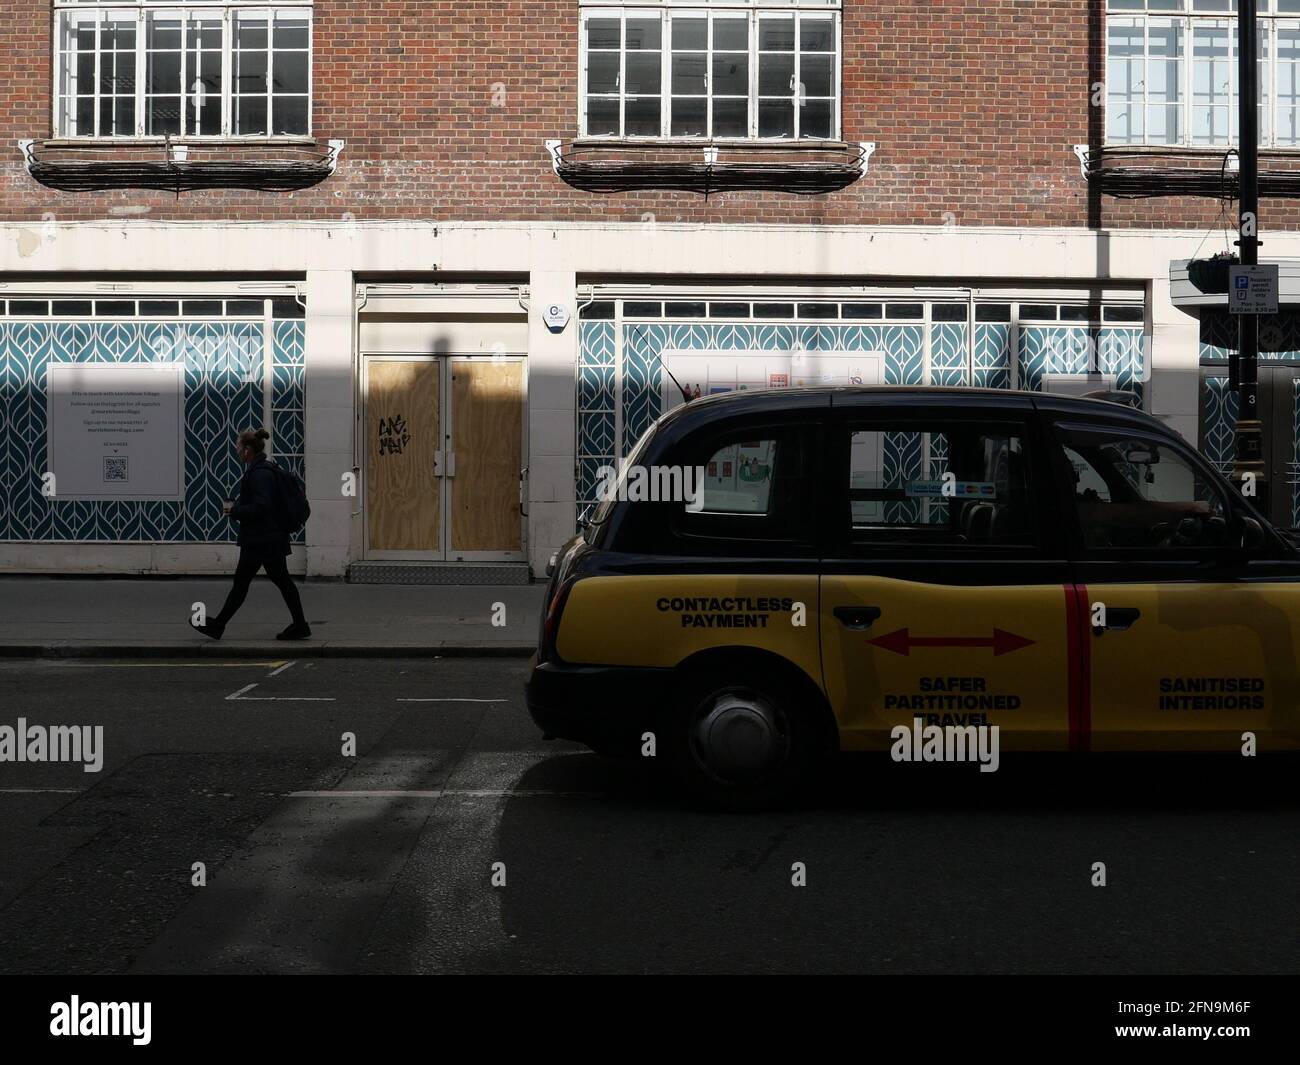 London, Greater London, England - May 11 2021: Shop boarded up on Thayer Street in Marylebone during lockdown as a taxi and pedestrian pass by. Stock Photo